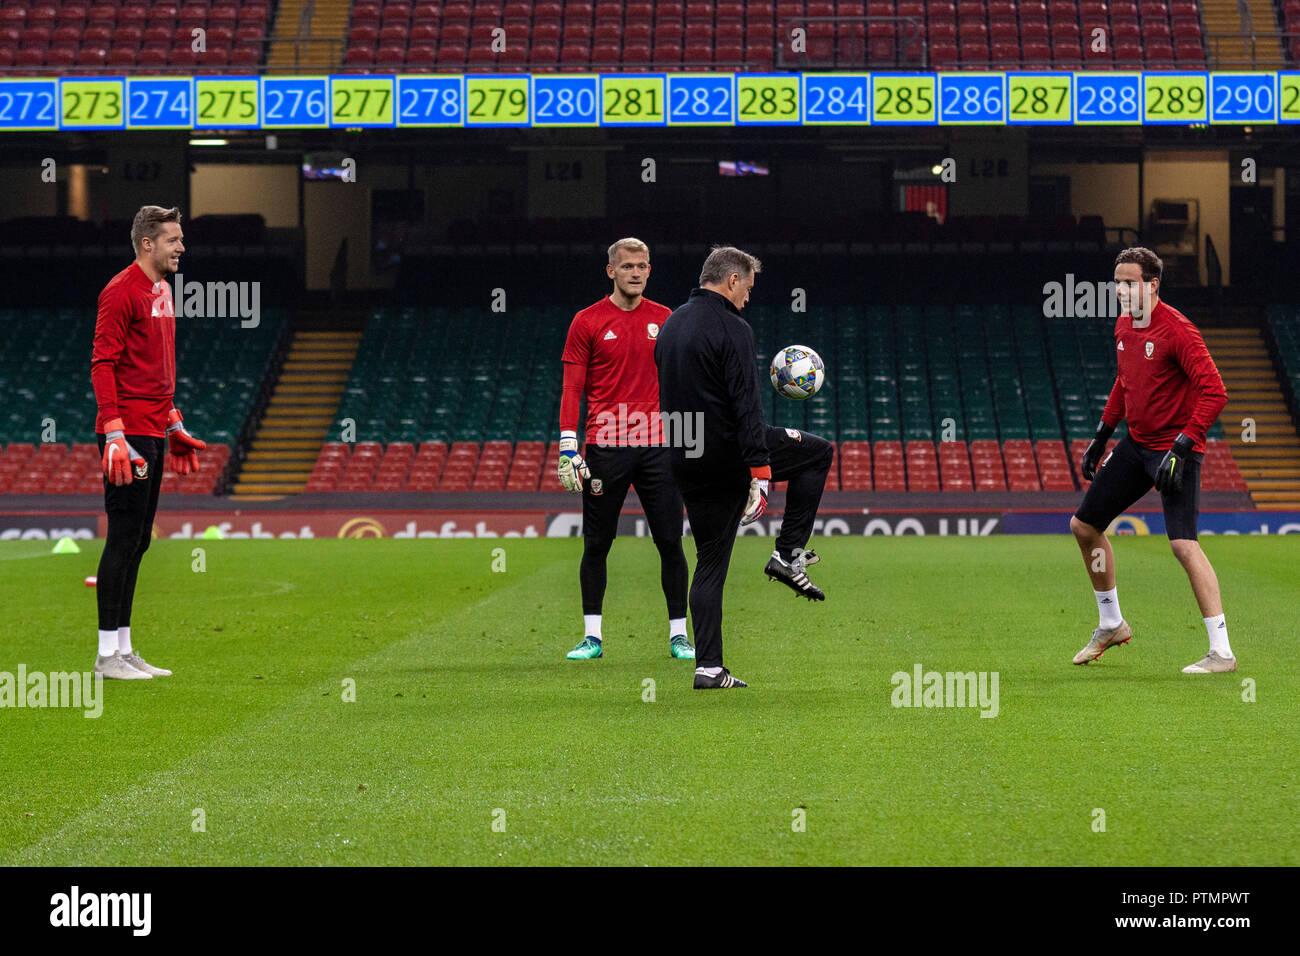 Cardiff, Wales. 10th October, 2018. Wales goalkeeper Wayne Hennessey trains at the Principality Stadium ahead of their upcoming international matches against Spain & Republic of Ireland.  Lewis Mitchell/YCPD. Credit: Lewis Mitchell/Alamy Live News Stock Photo